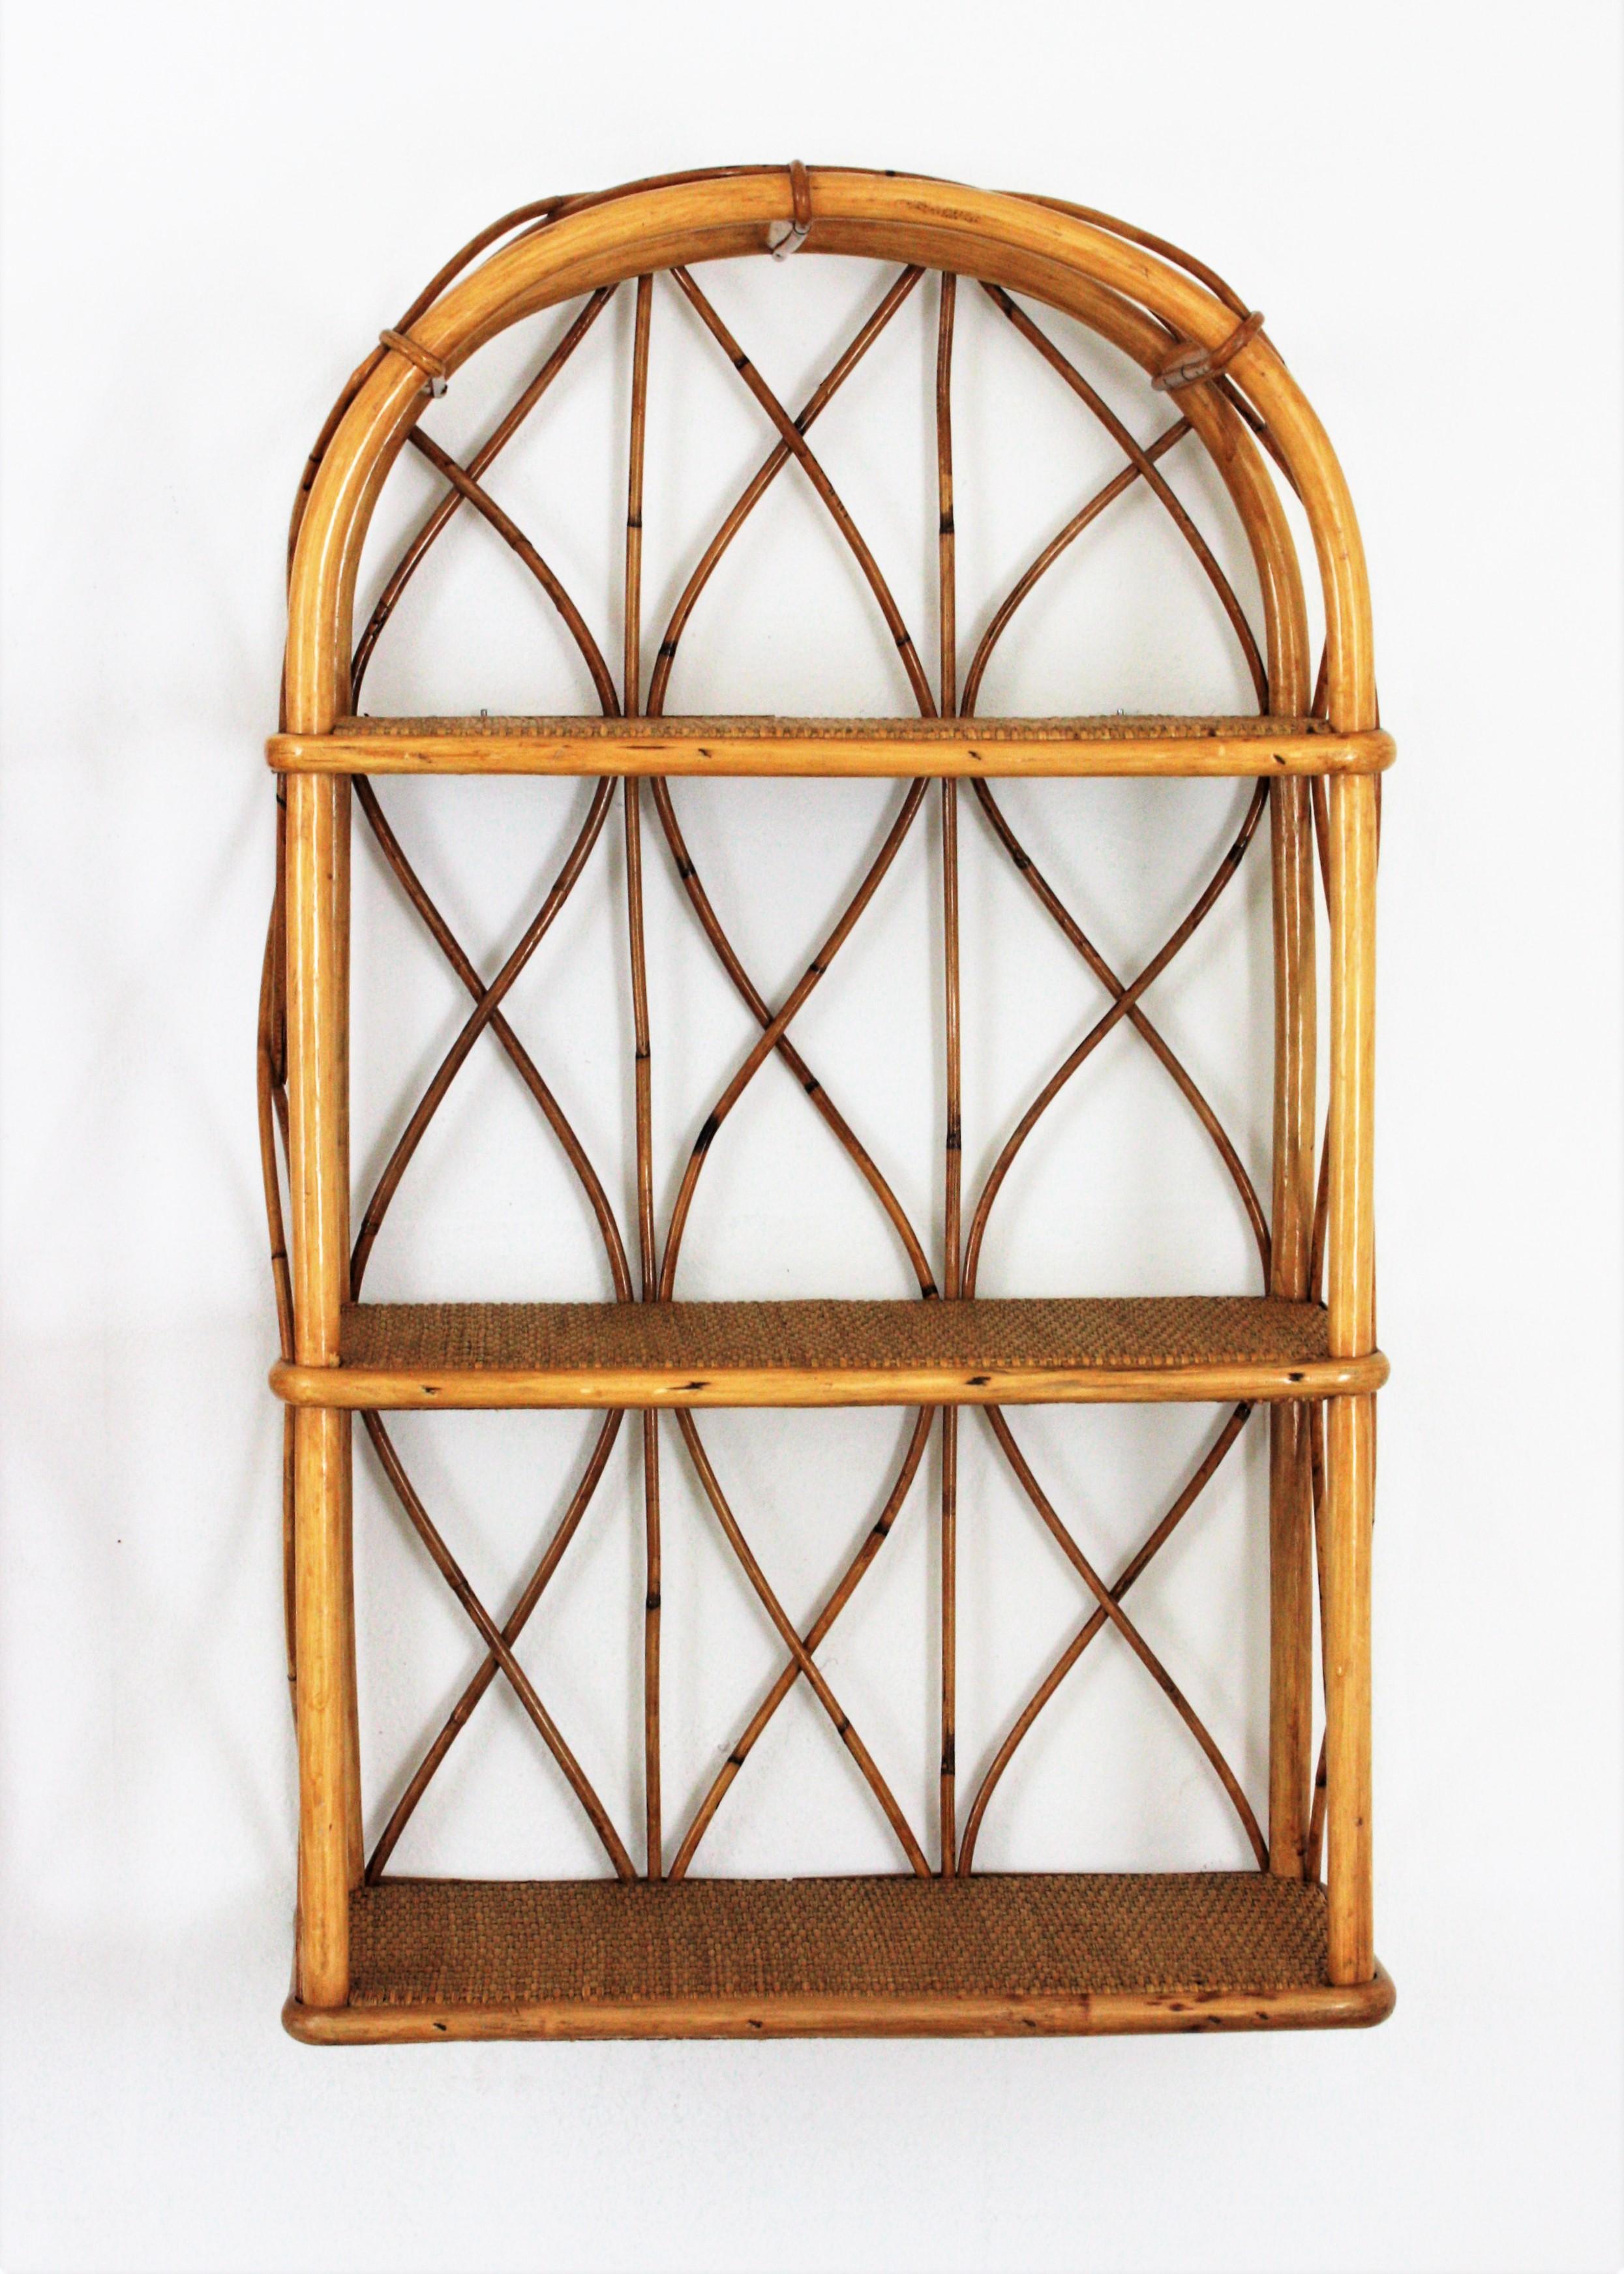 European Pair of Bamboo and Rattan Wall Shelves with Round Tops